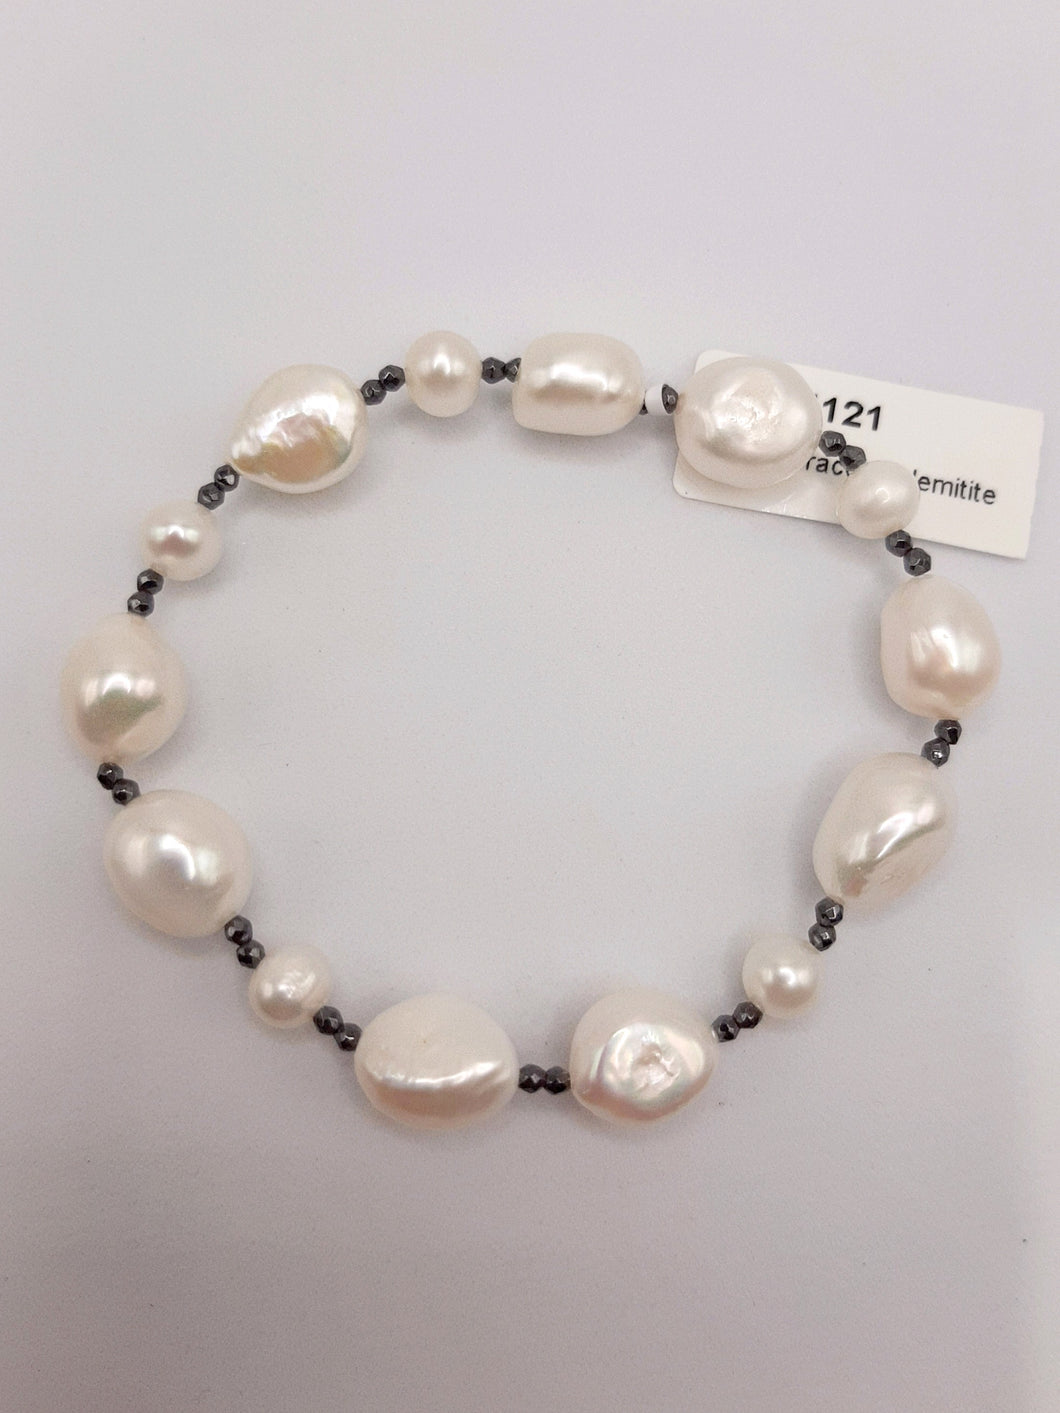 Freshwater Pearl Stretch Bracelet Featuring Pearls and Hemitite